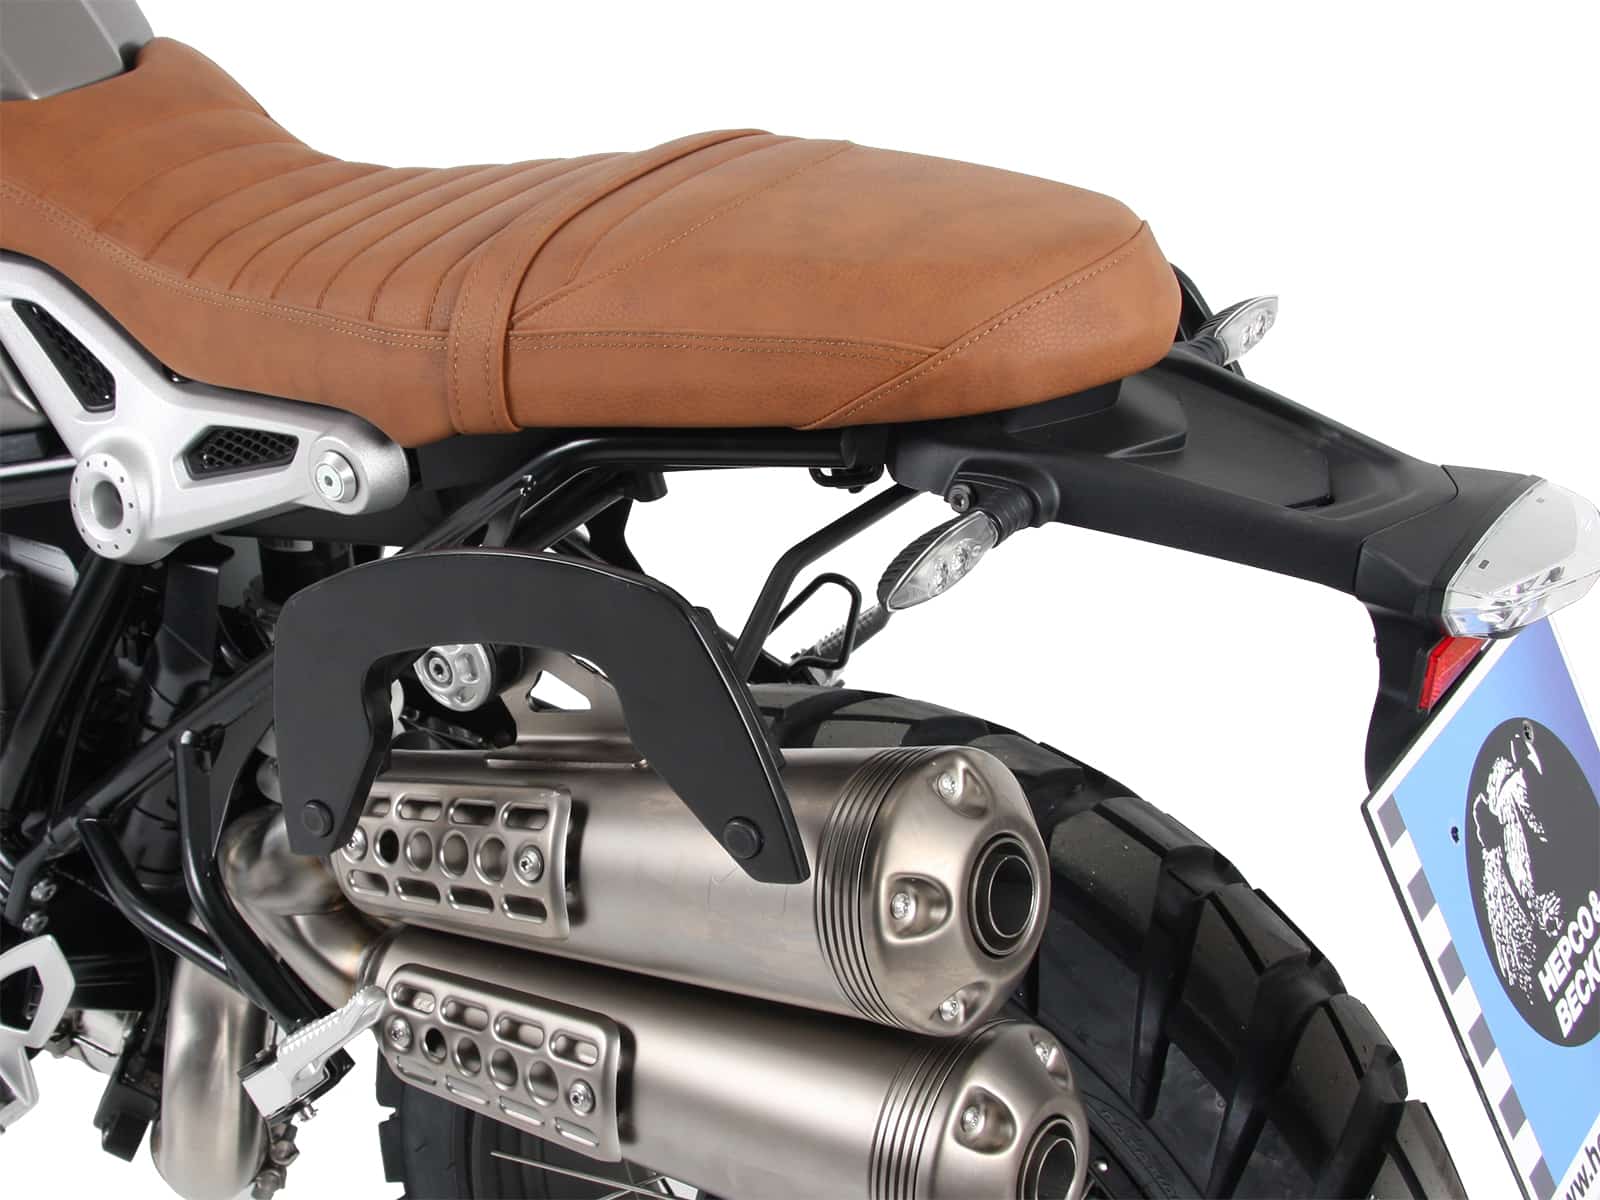 C-Bow sidecarrier for BMW R nineT Scrambler (2016-) / Urban G/S 40 Years Edition